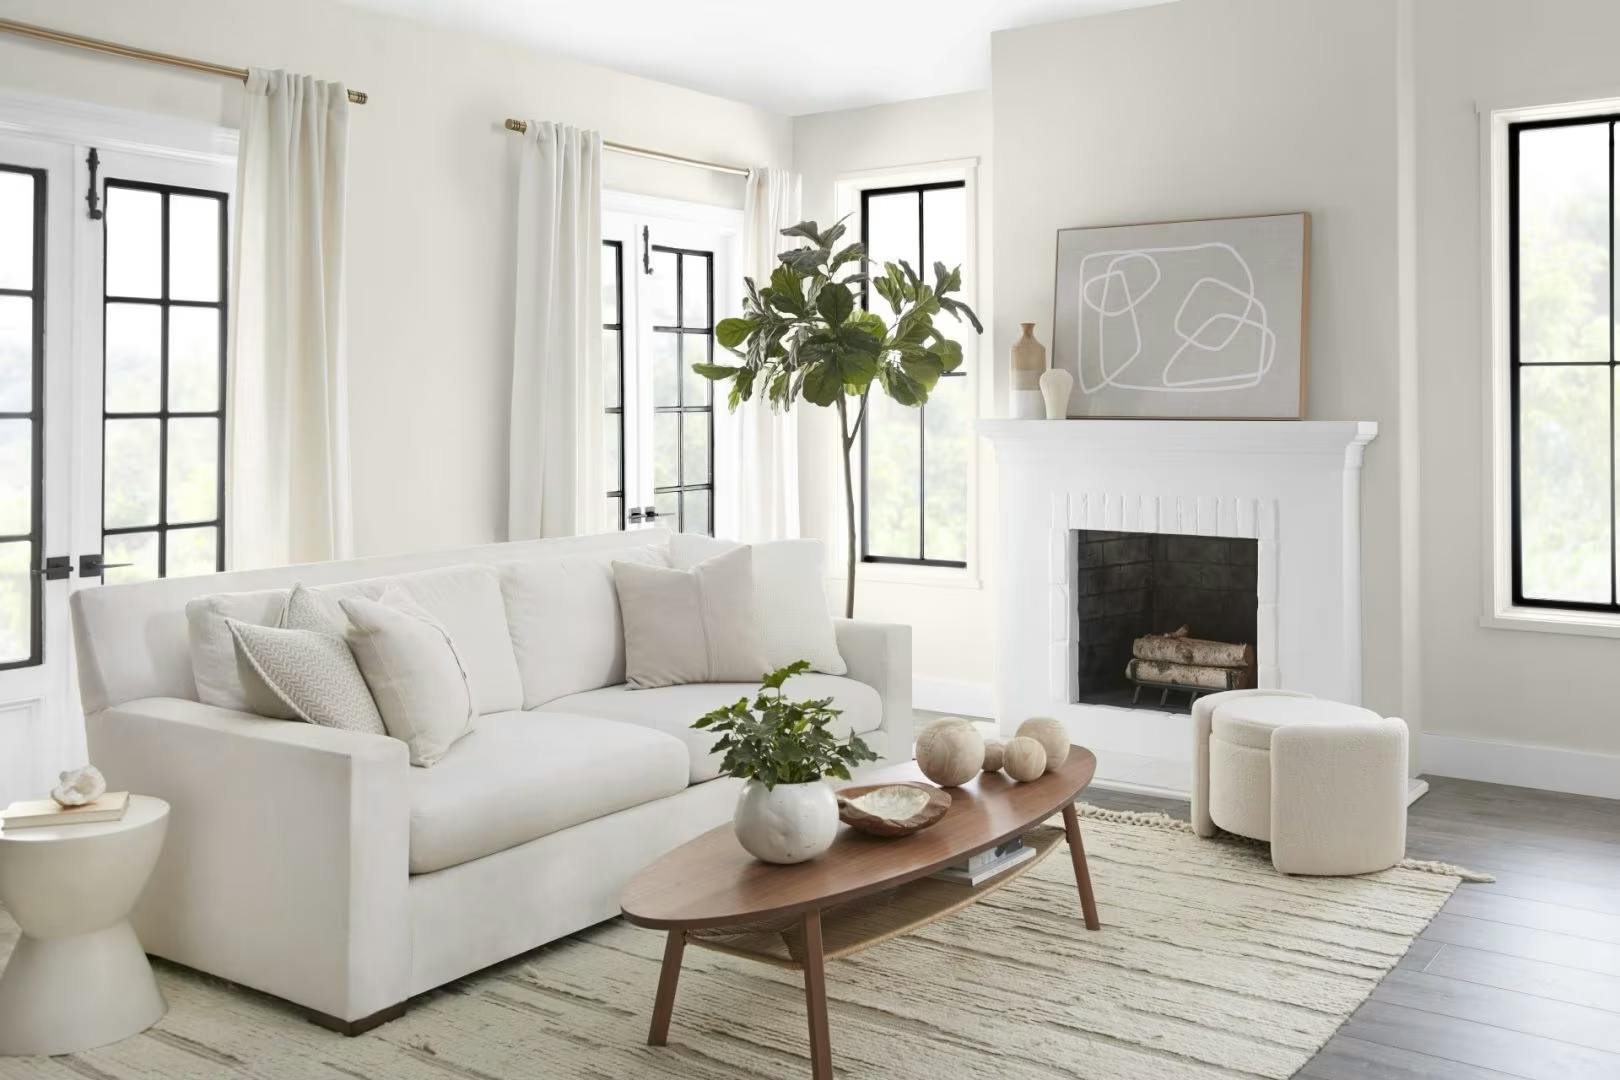 Blank Canvas by Behr, featured in Better Home and Gardens